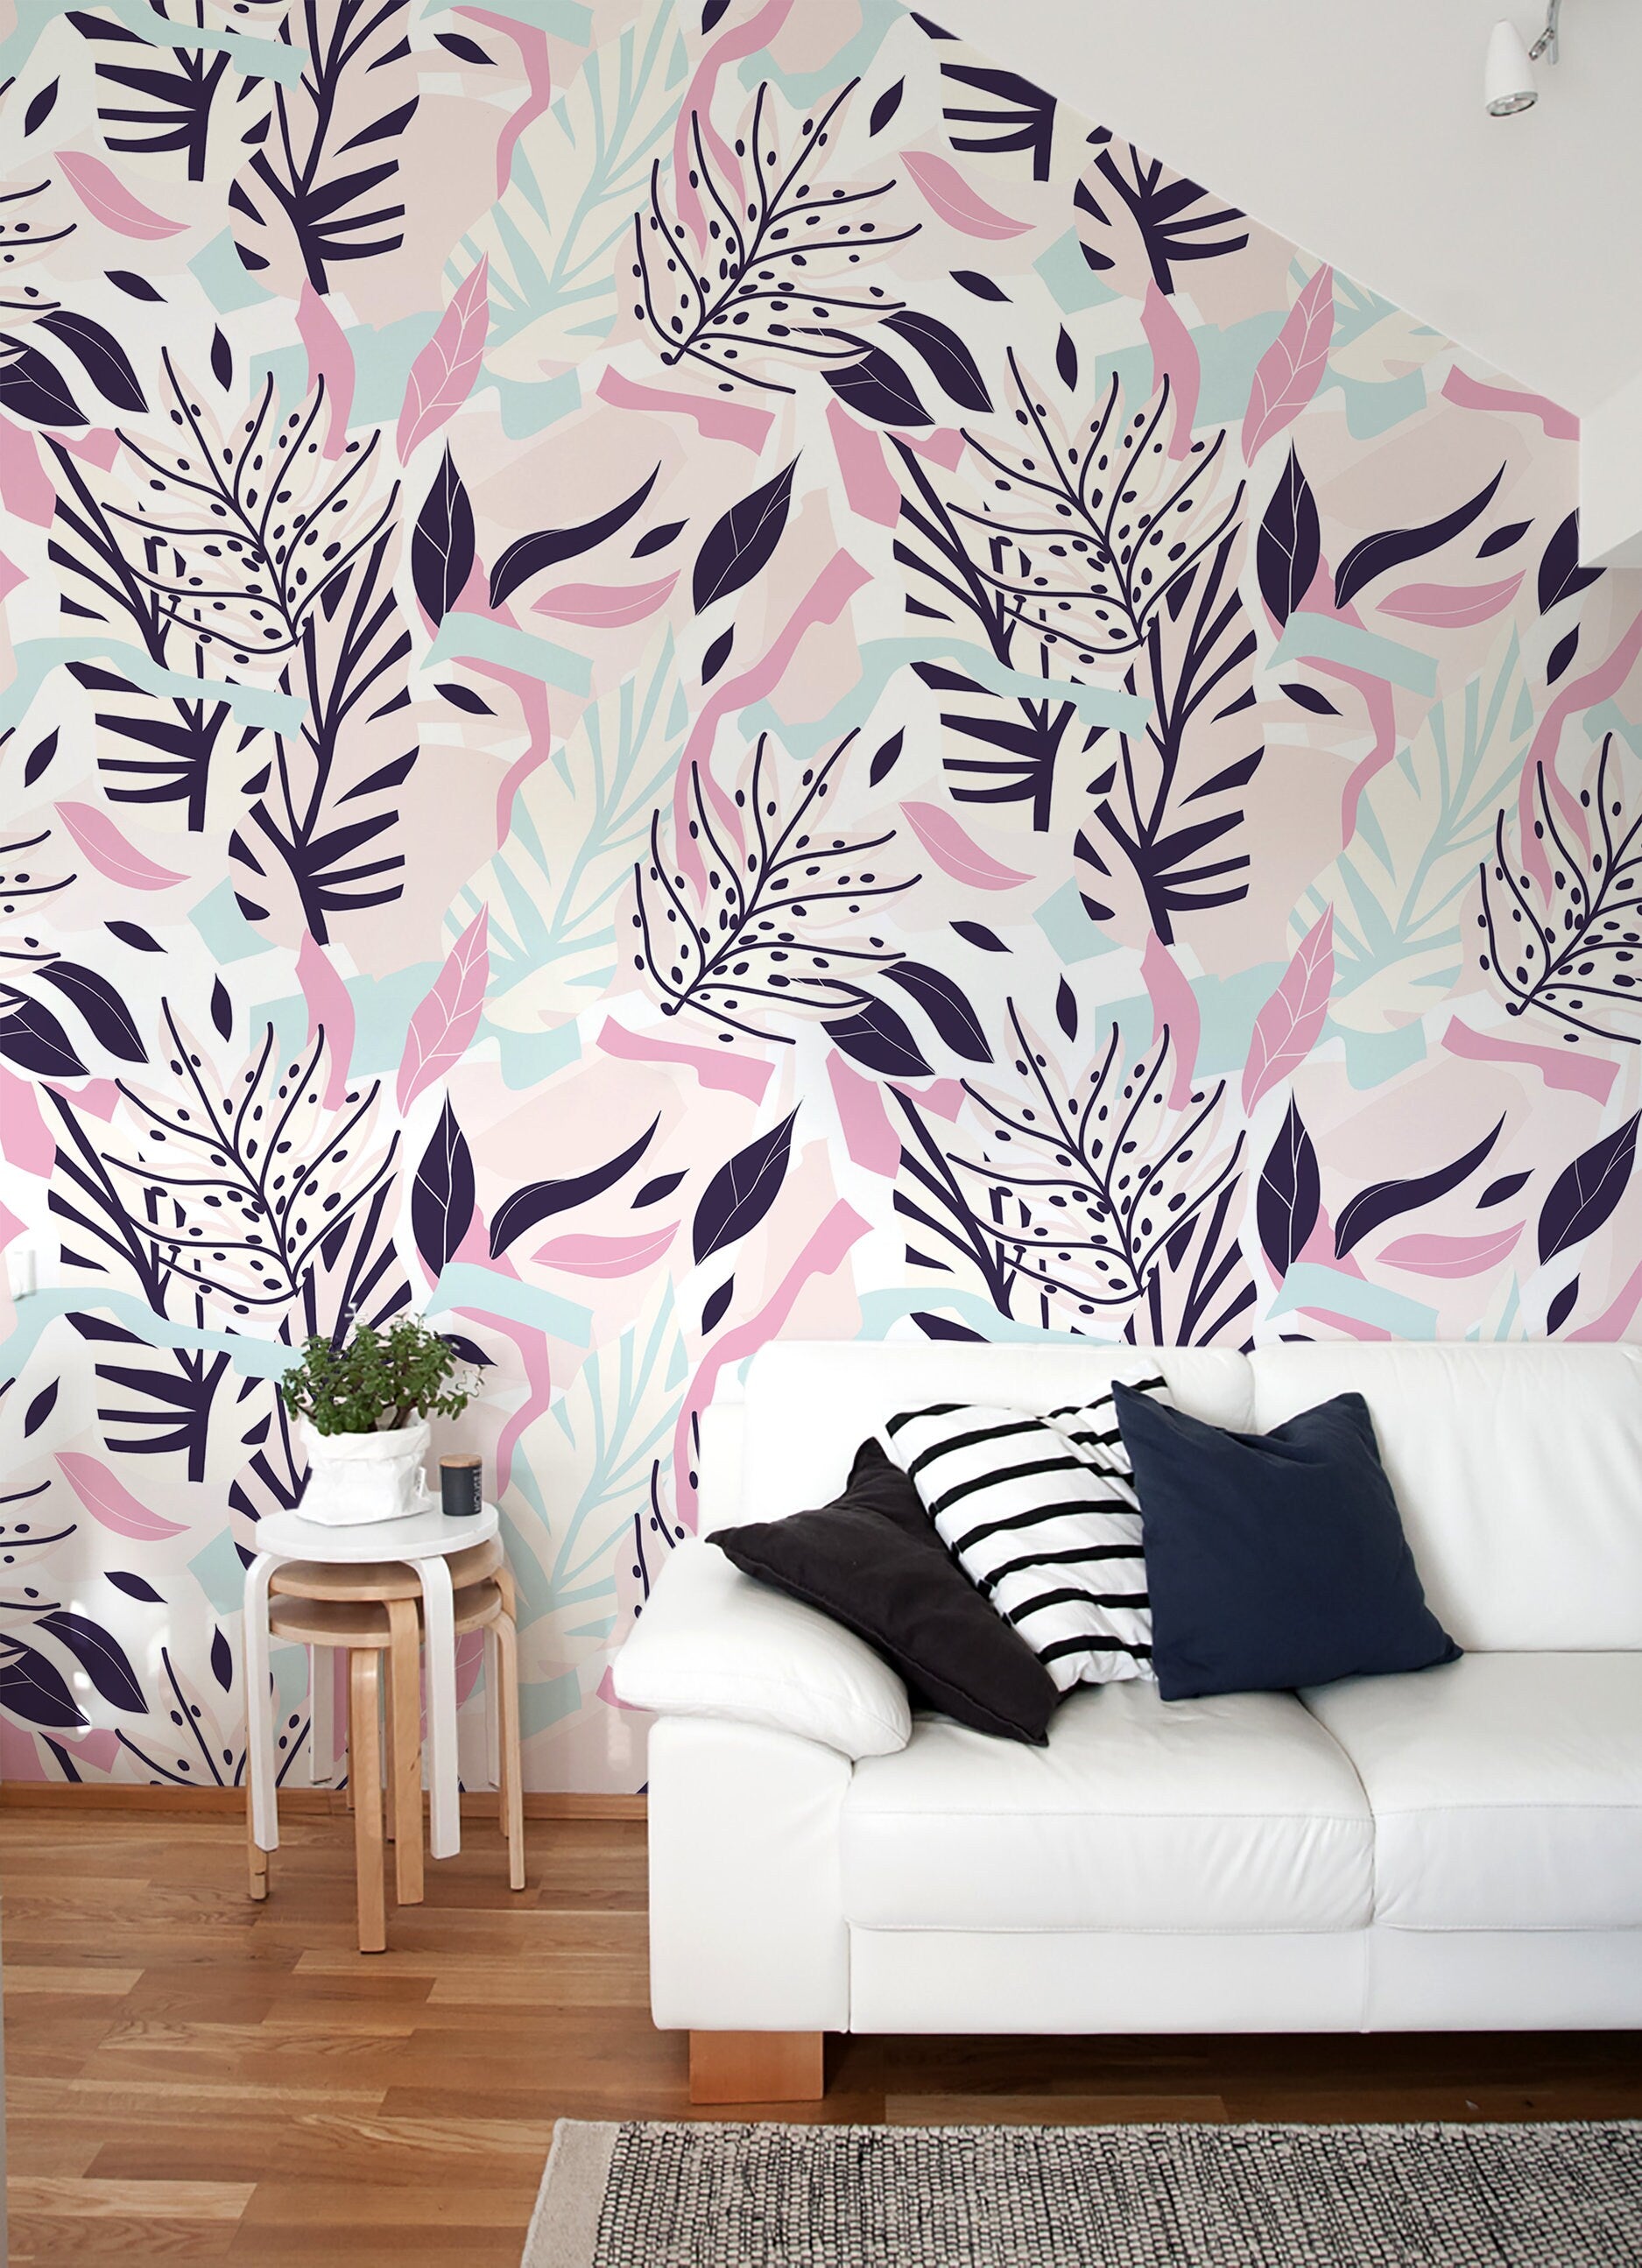 Pastel Color Leaves Removable Wallpaper Wallpaper Temporary Wallpaper Contemporary Wallpaper Peel and Stick Wallpaper - B188